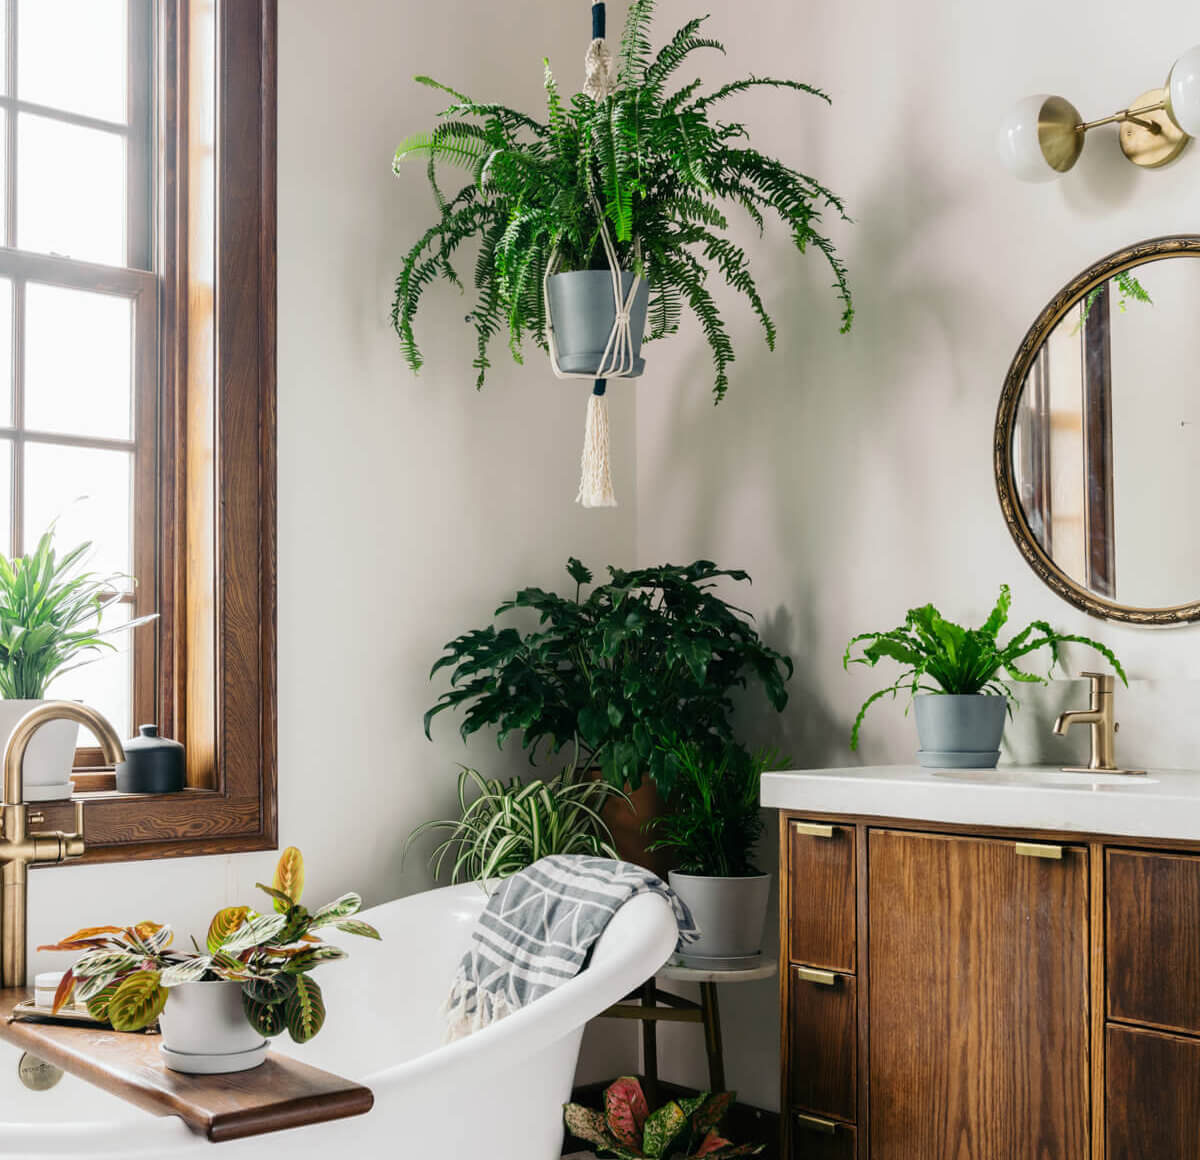  Plants In Bathroom for Small Space